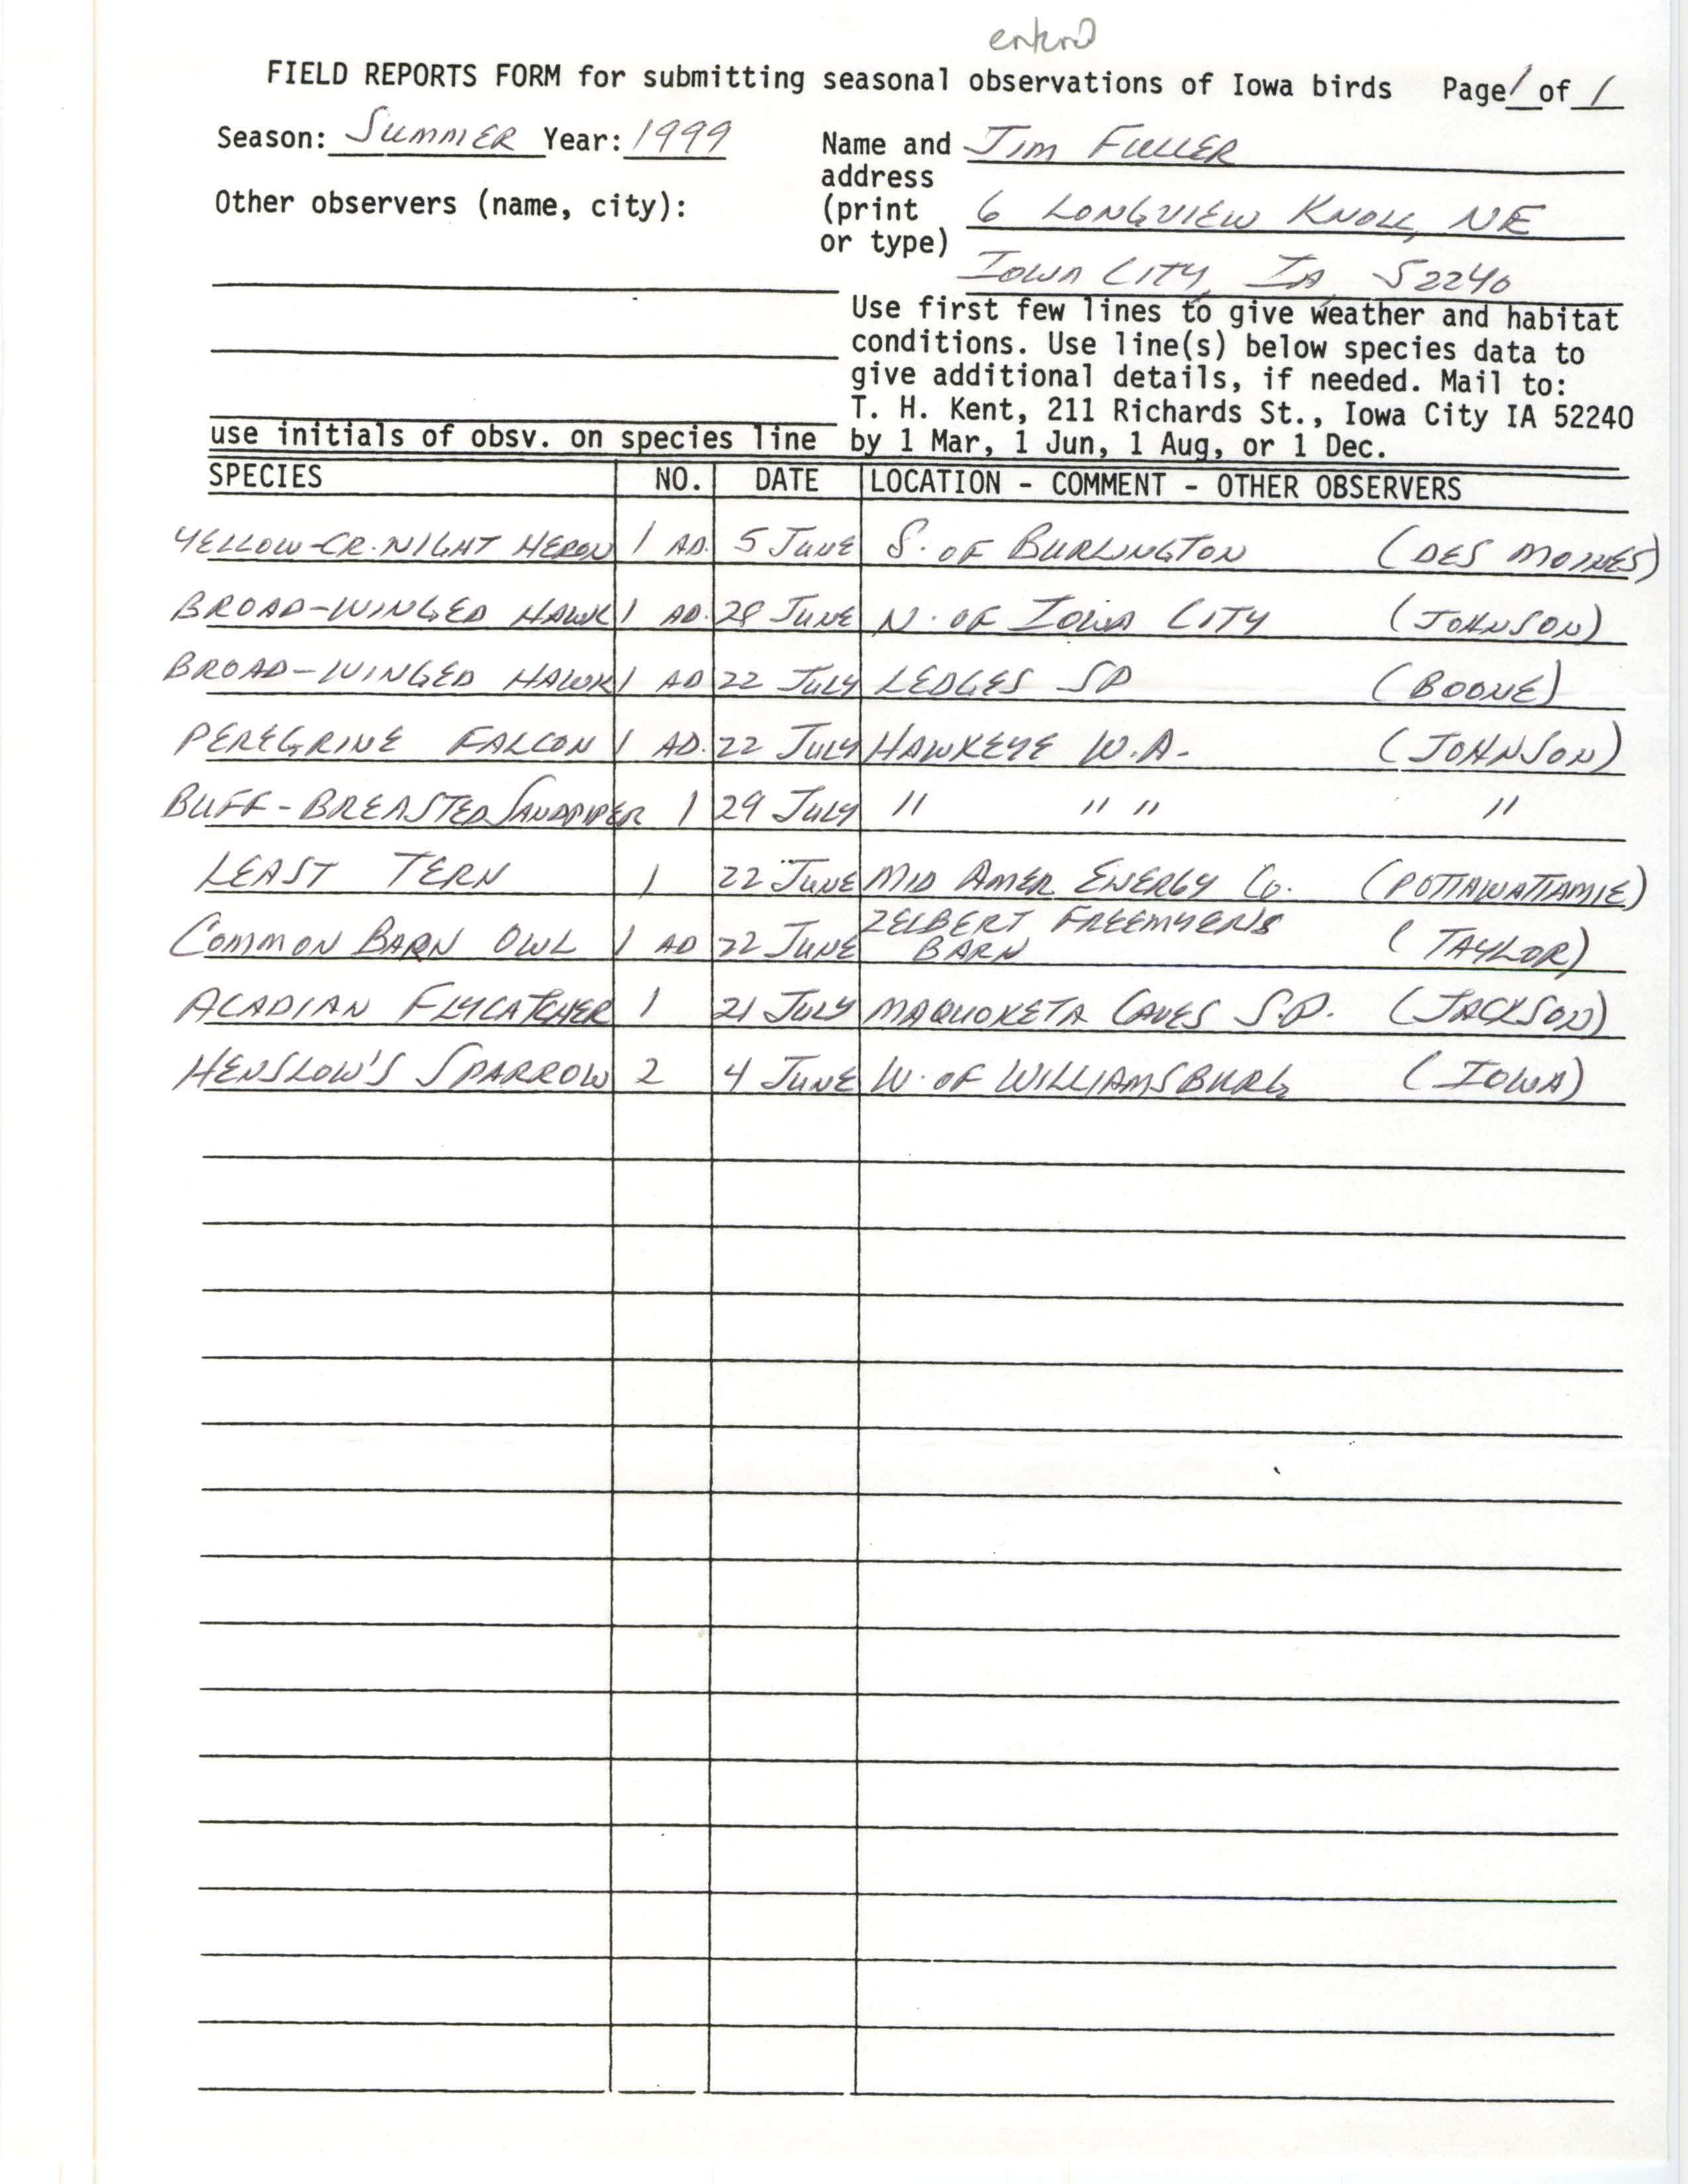 Field reports form for submitting seasonal observations of Iowa birds, summer 1999, Jim Fuller